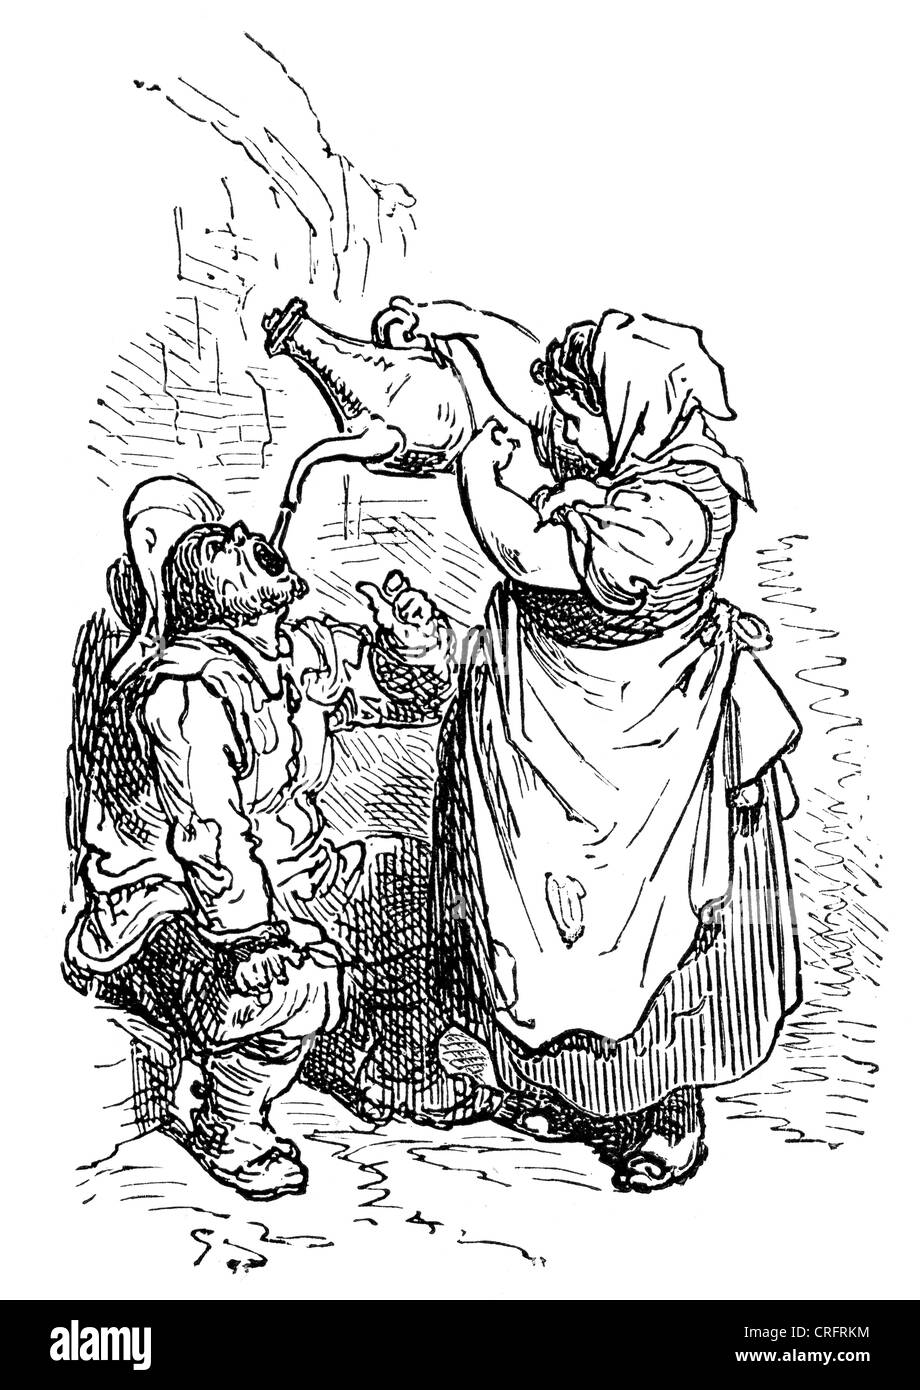 Sancho Panza drinking. Illustration by Gustave Dore from Don Quixote. Stock Photo